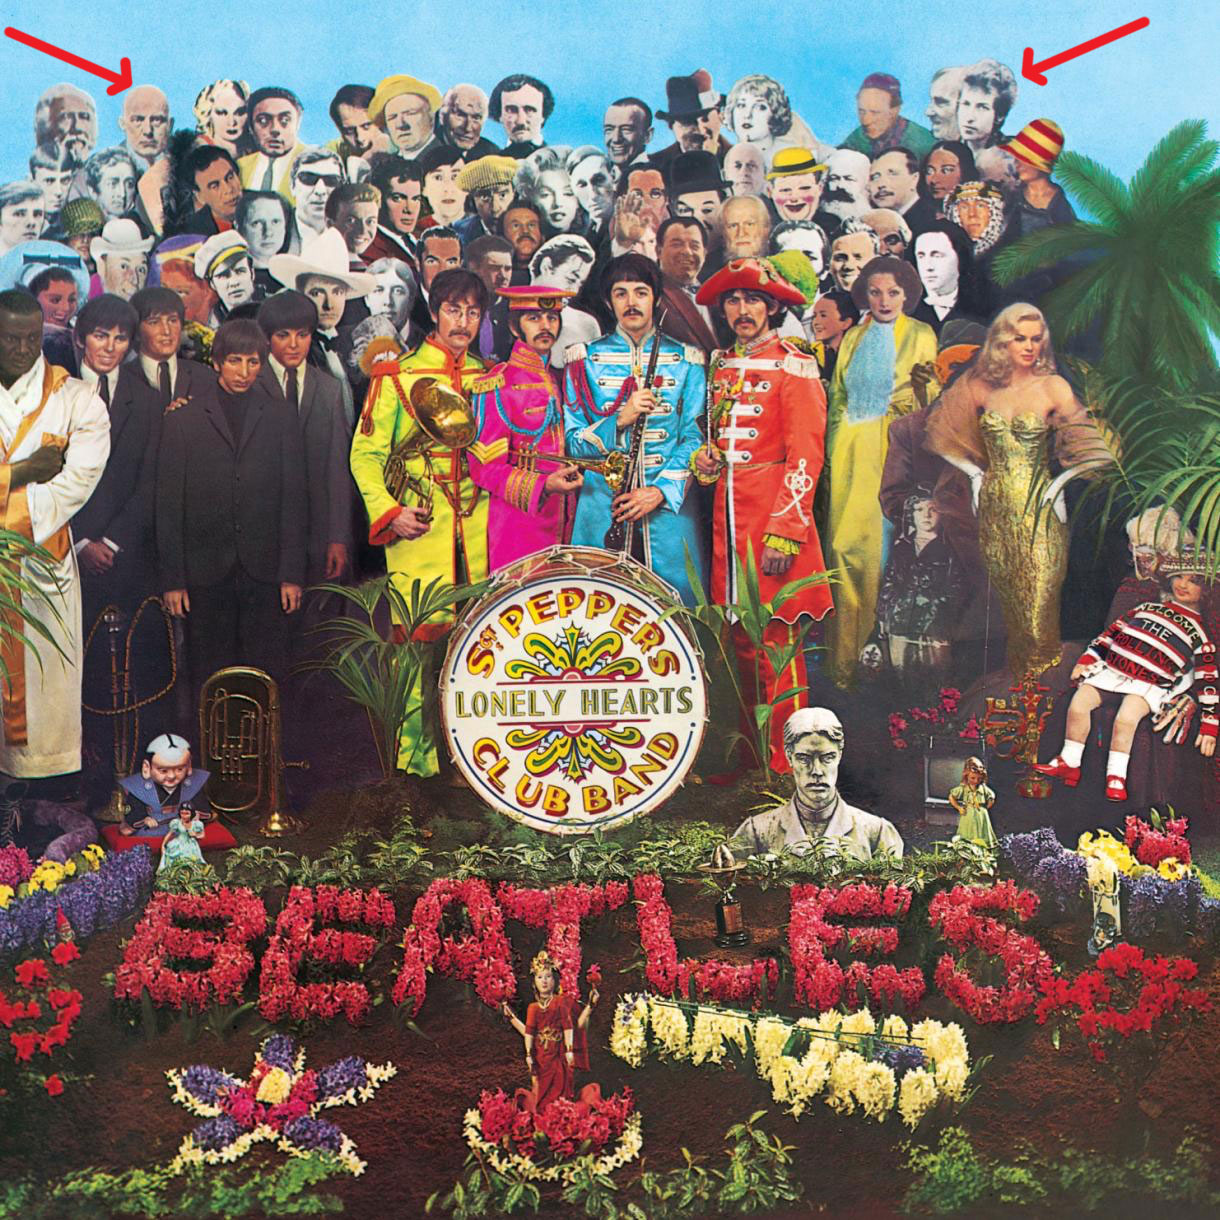 Sgt Pepper's Lonely Harts Club Band